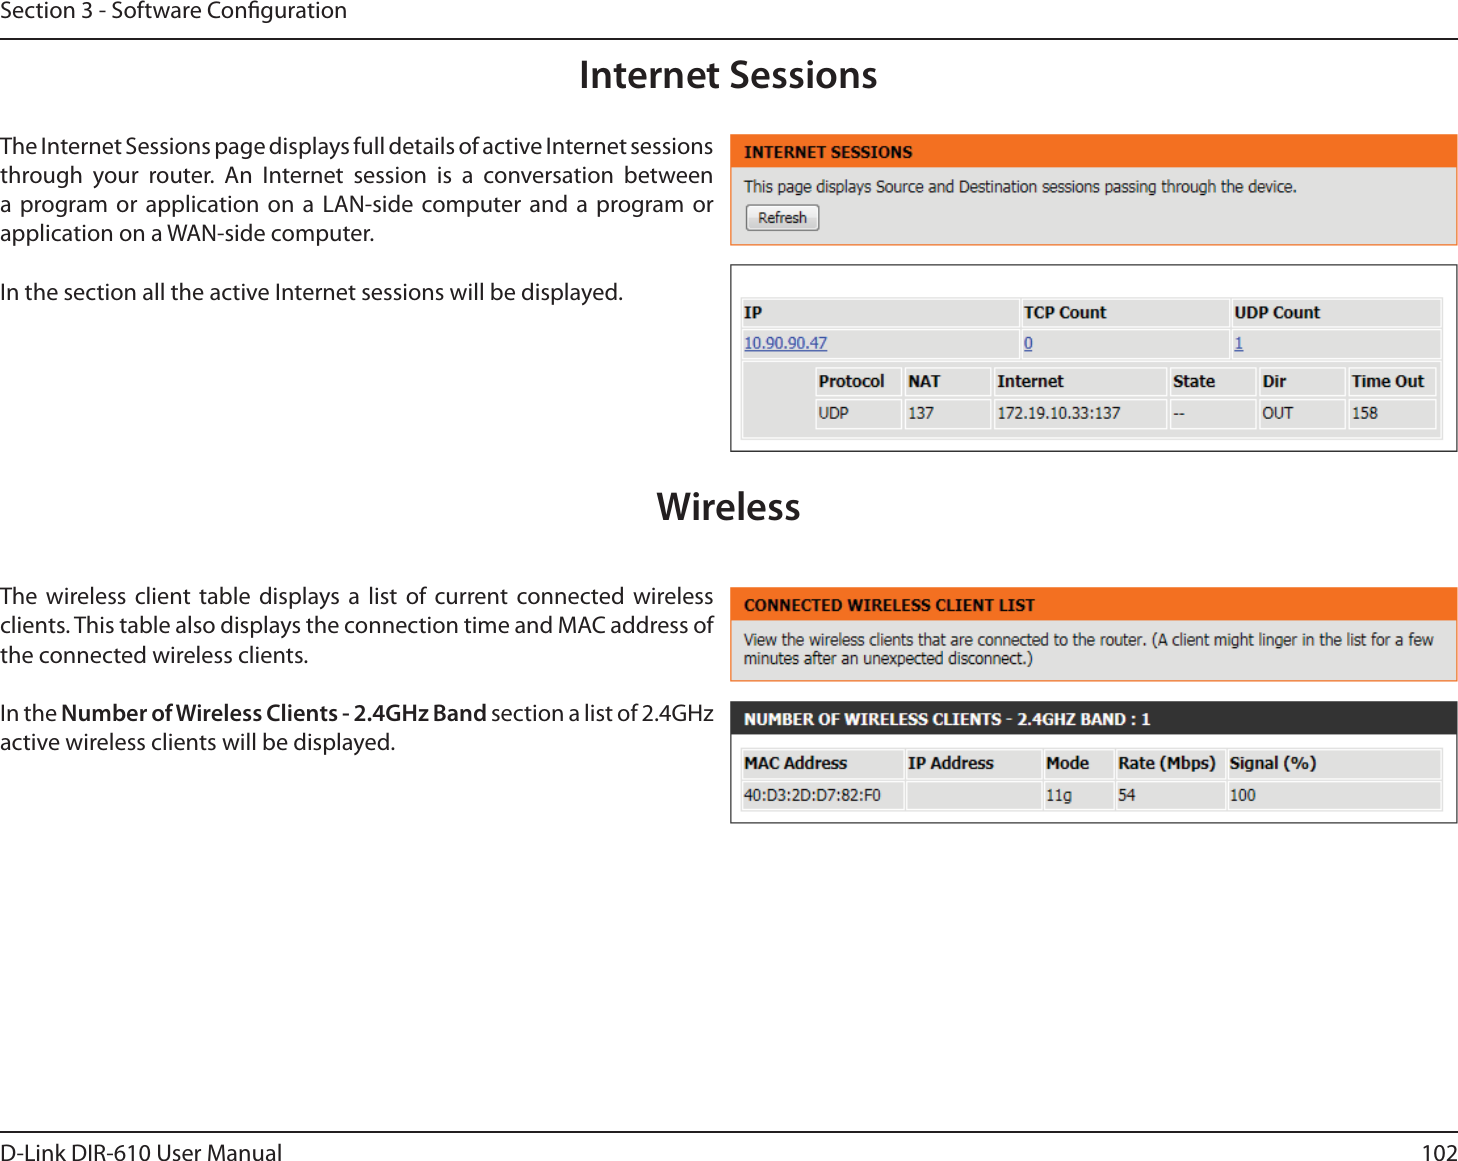 102D-Link DIR-610 User ManualSection 3 - Software CongurationInternet SessionsThe Internet Sessions page displays full details of active Internet sessions through your router. An Internet session is a conversation between a program or application on a LAN-side computer and a program or application on a WAN-side computer.In the section all the active Internet sessions will be displayed.WirelessThe wireless client table displays a list of current connected wireless clients. This table also displays the connection time and MAC address of the connected wireless clients.In the Number of Wireless Clients - 2.4GHz Band section a list of 2.4GHz active wireless clients will be displayed.